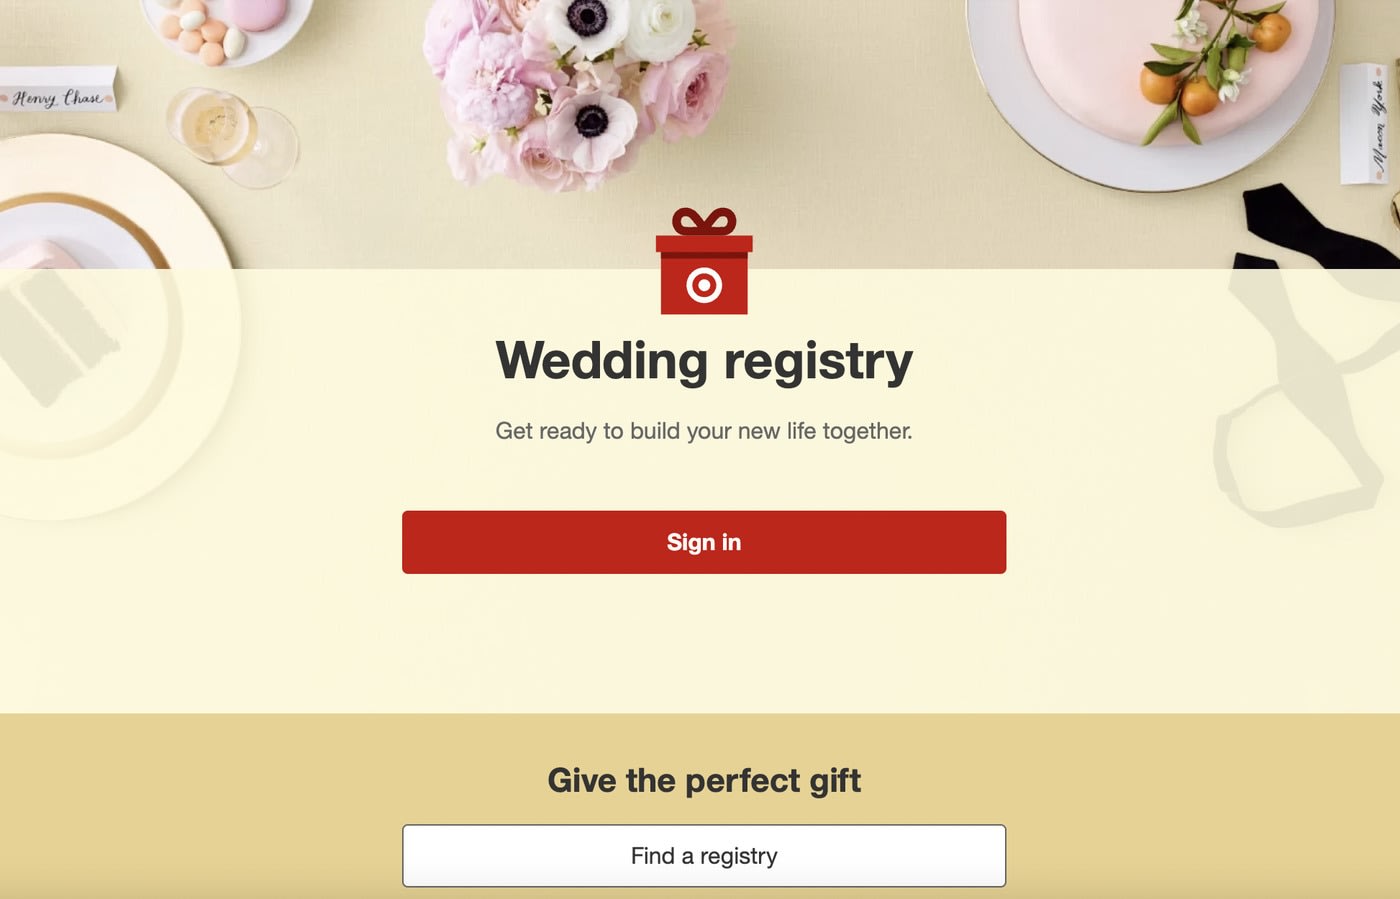 The 16 Best Wedding Registry Sites to Use for Your Big Day - Zola Expert  Wedding Advice